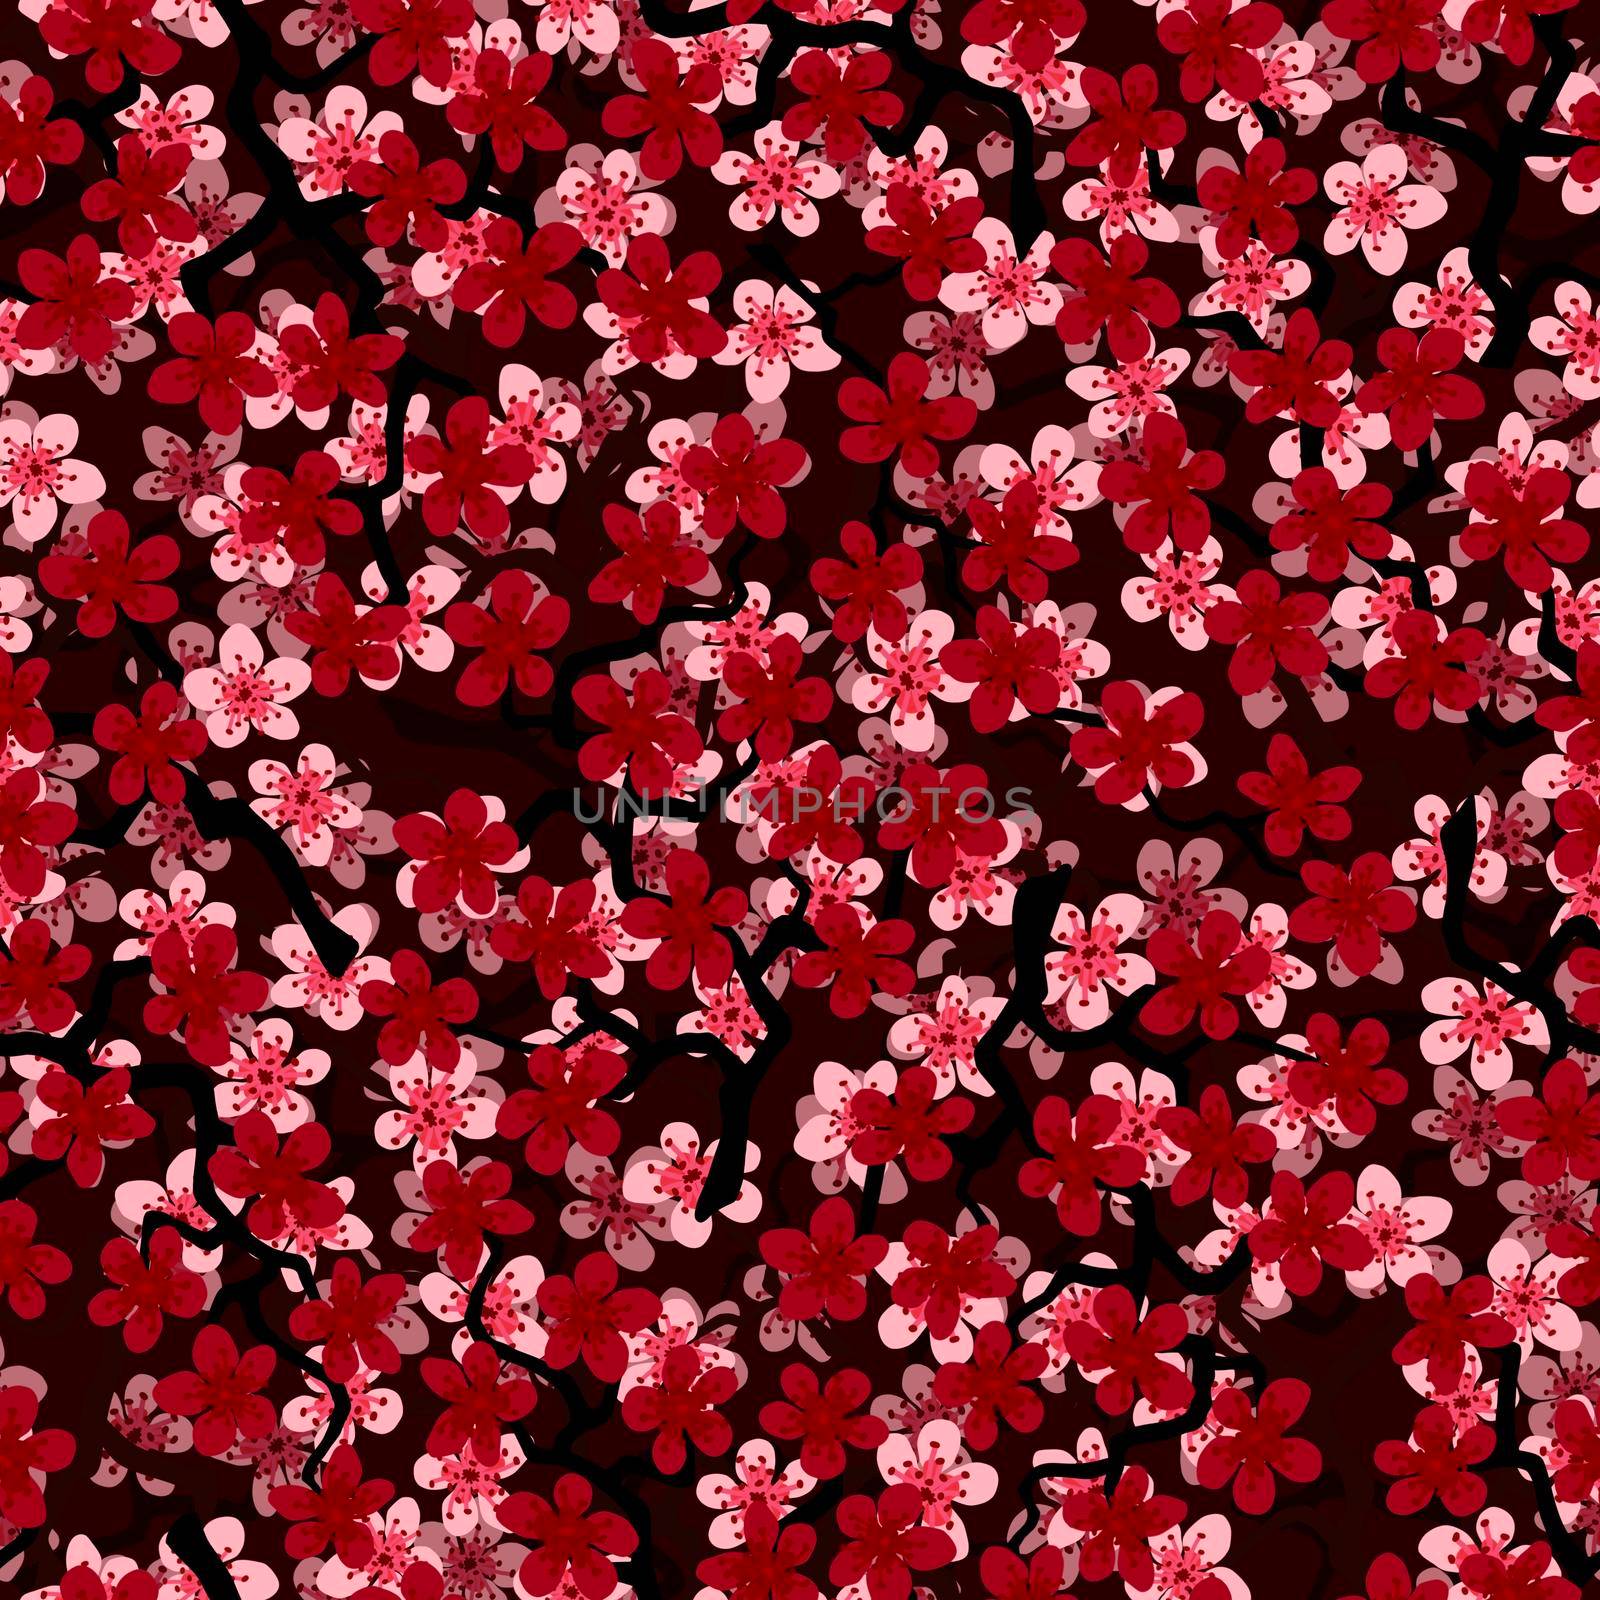 Seamless pattern with blossoming Japanese cherry sakura branches for fabric,packaging,wallpaper,textile decor,design,invitations,print,gift wrap,manufacturing.Pink and red flowers on black background by Angelsmoon